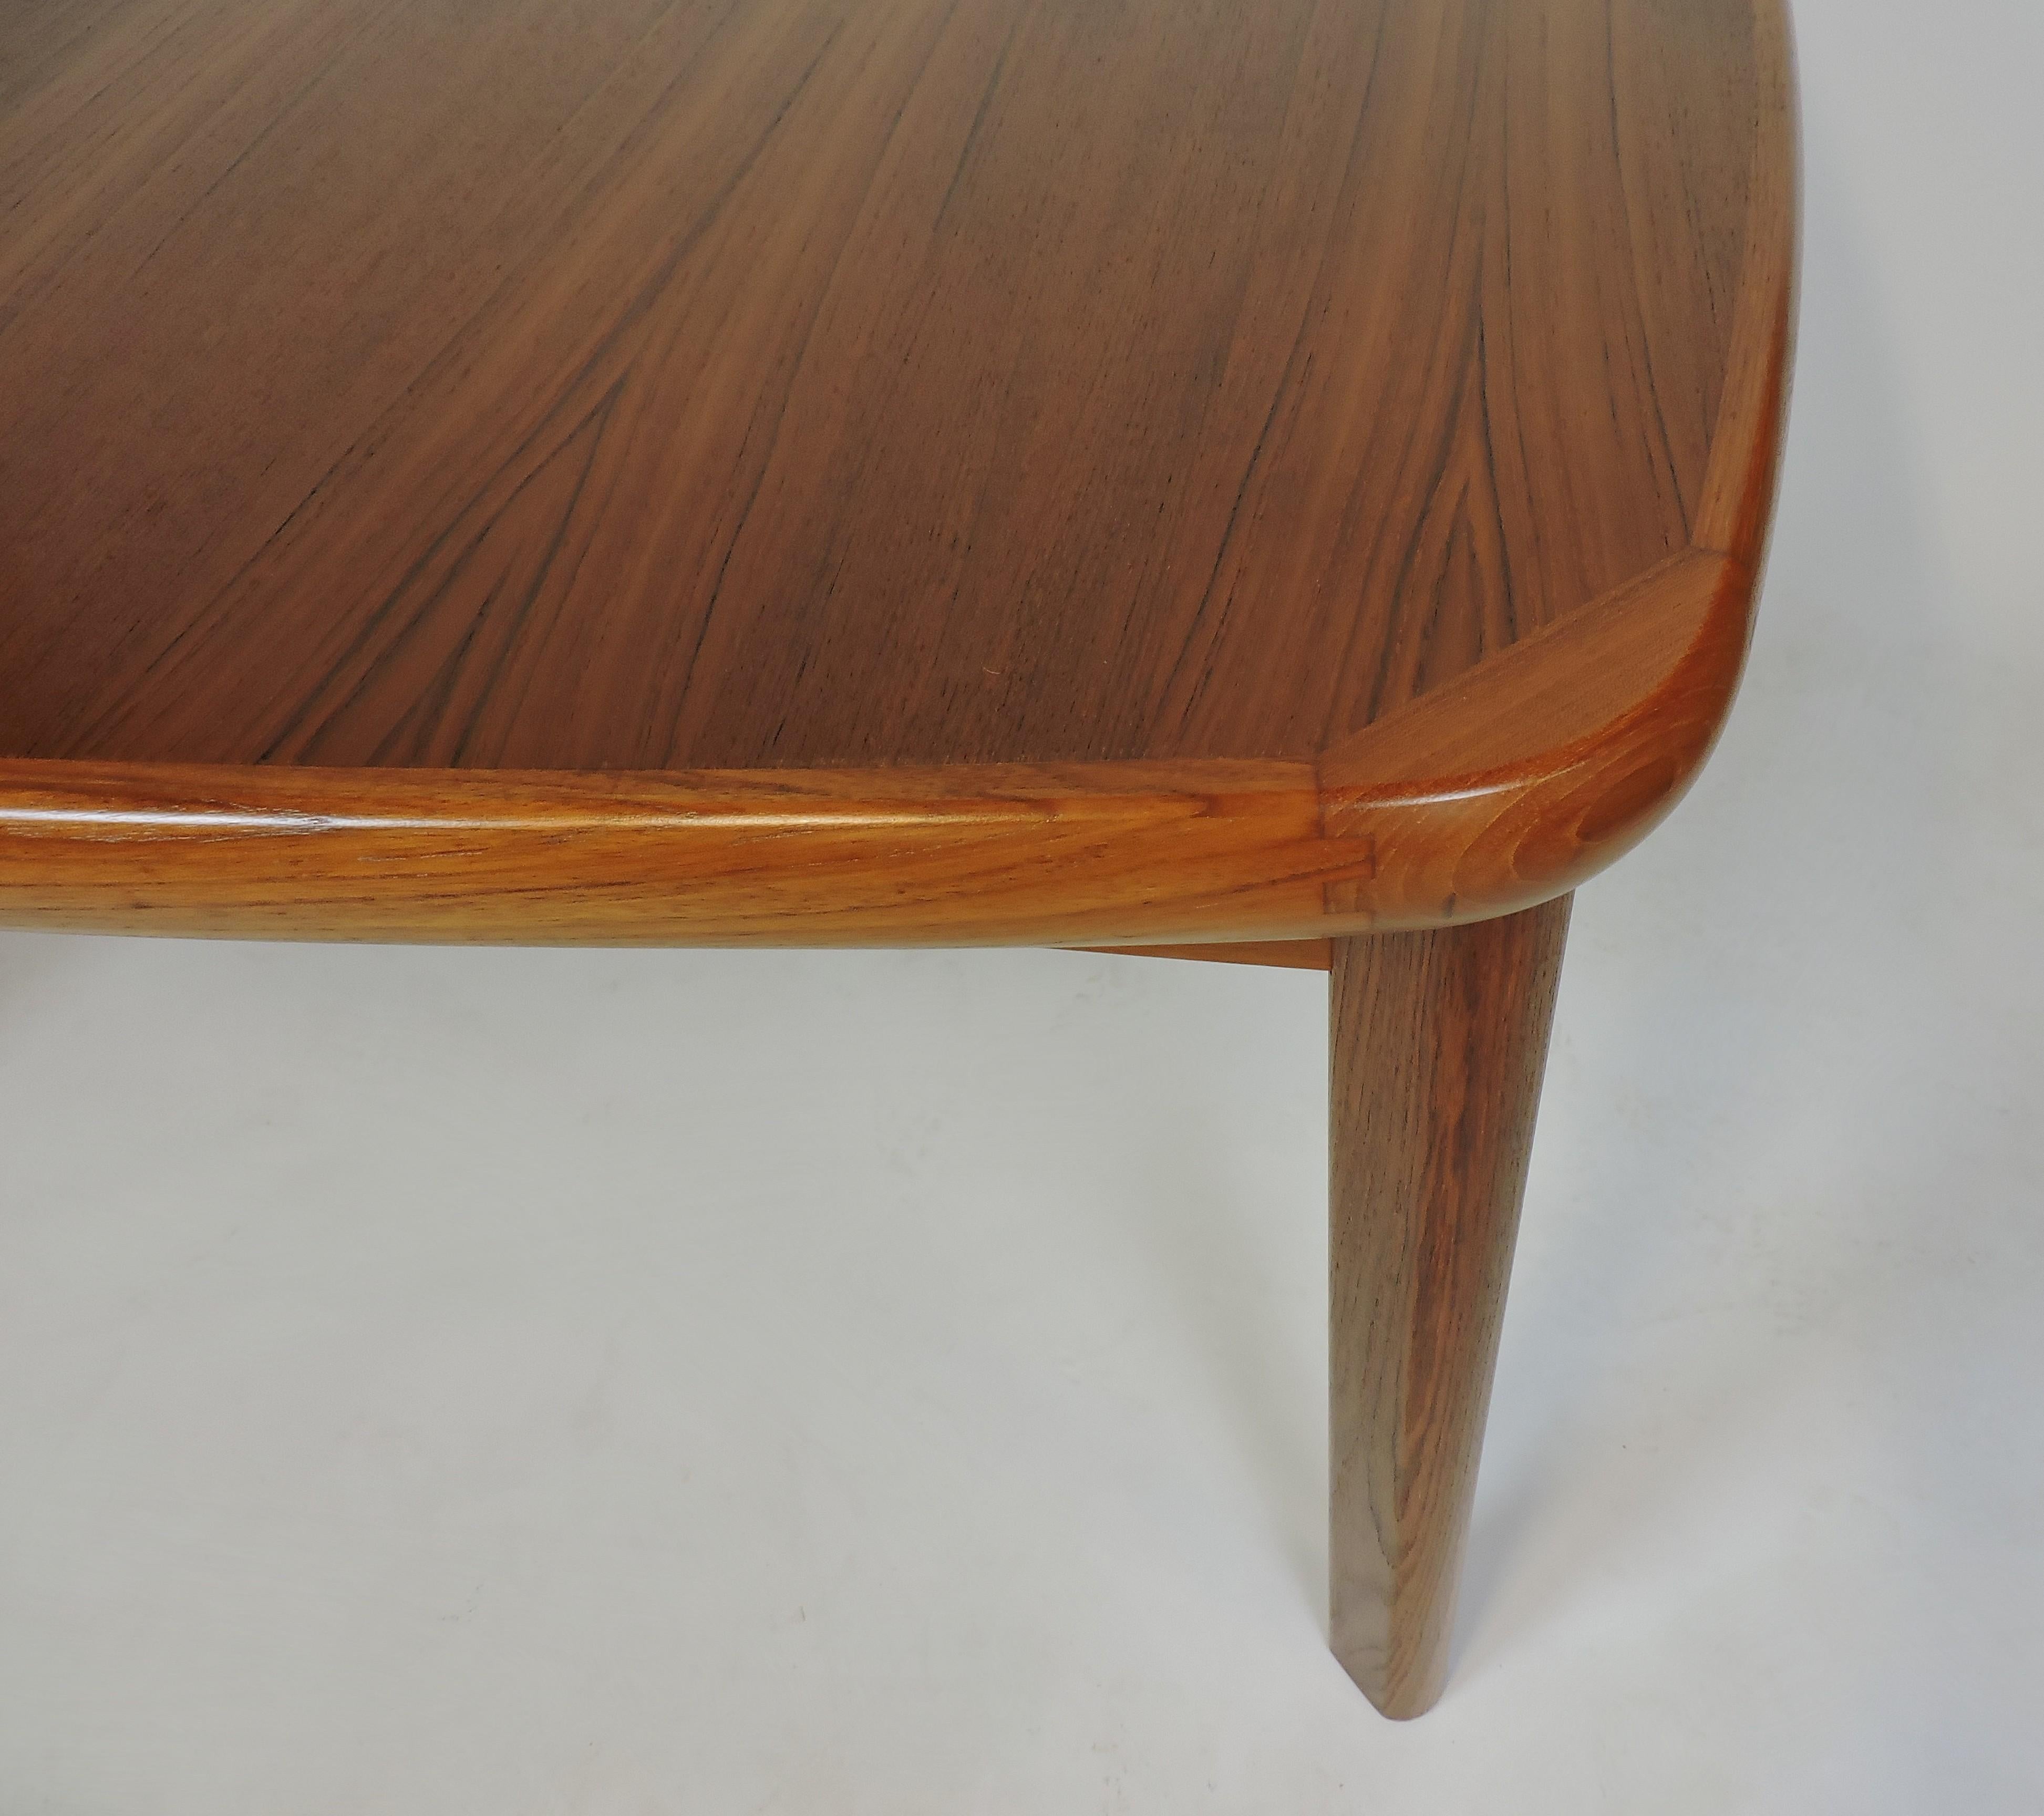 Late 20th Century Danish Modern Design Extendable Teak Dining Table with Butterfly Leaf